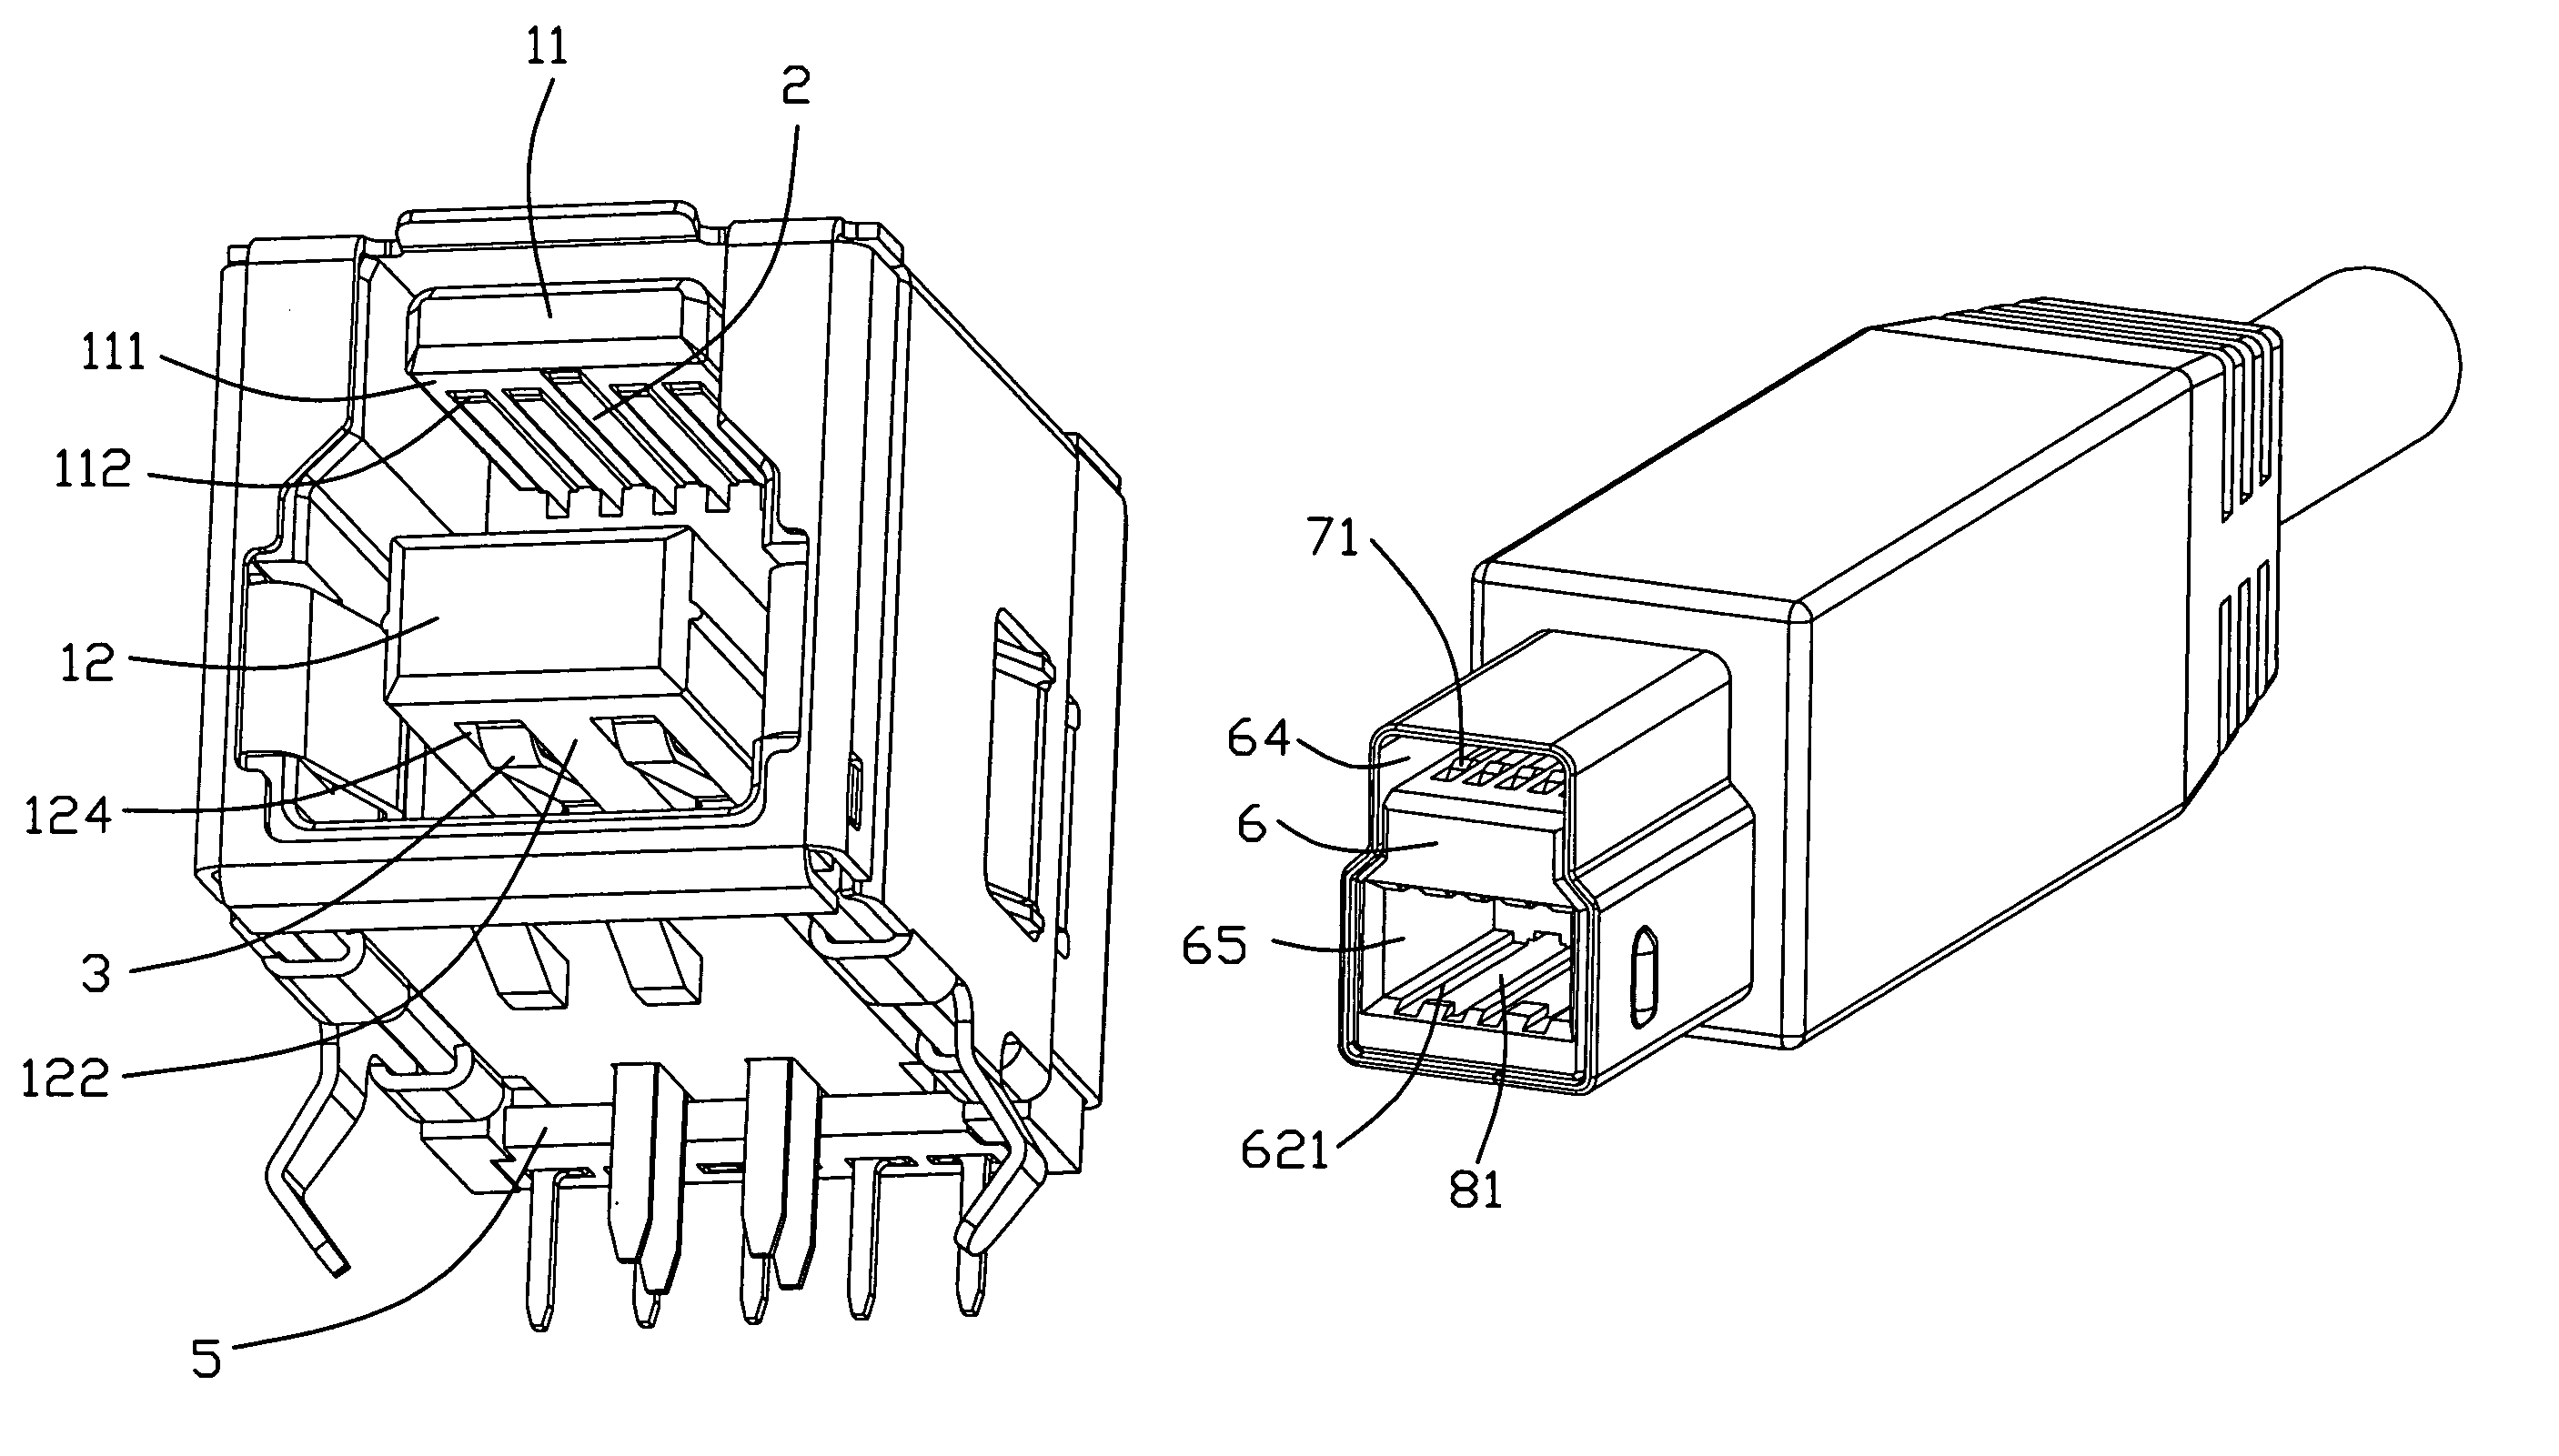 Electrical connector with additional mating port